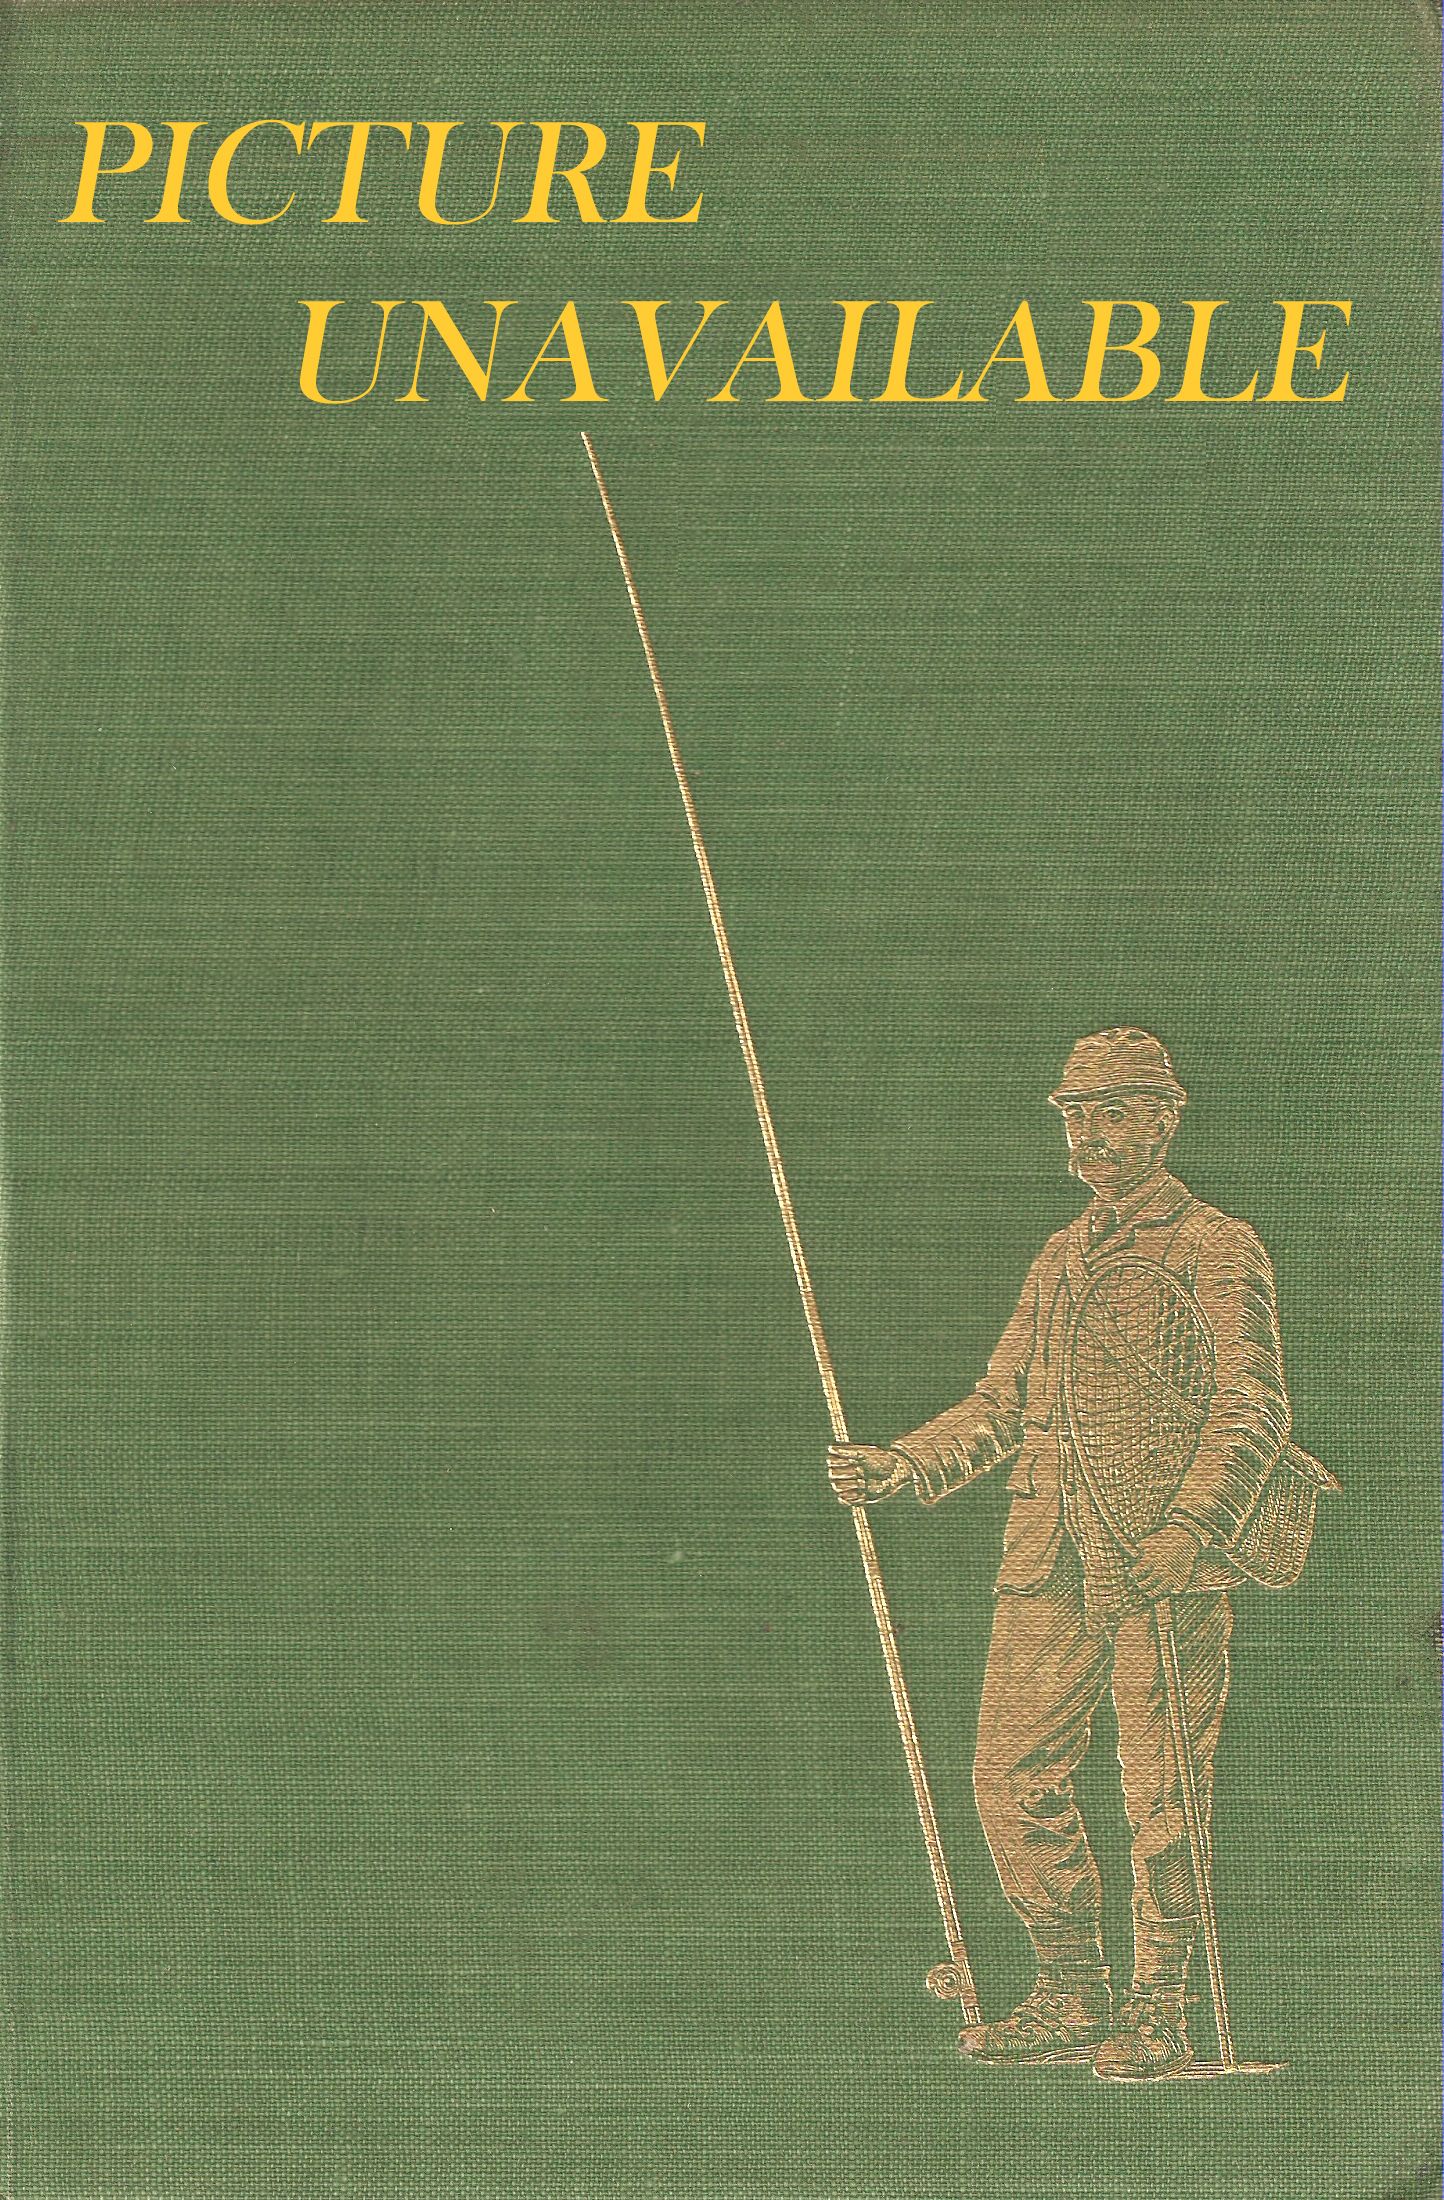 THE ART OF SHOOTING and FISHING FOR BEGINNERS. The Art Of Shooting For  Beginners, by F.W.E. Wagner, M.A., Sc.D. The Art Of Fishing For Beginners,  by F.W.E. Wagner, M.A., Sc.D. and E. Maude Cox, M.A.